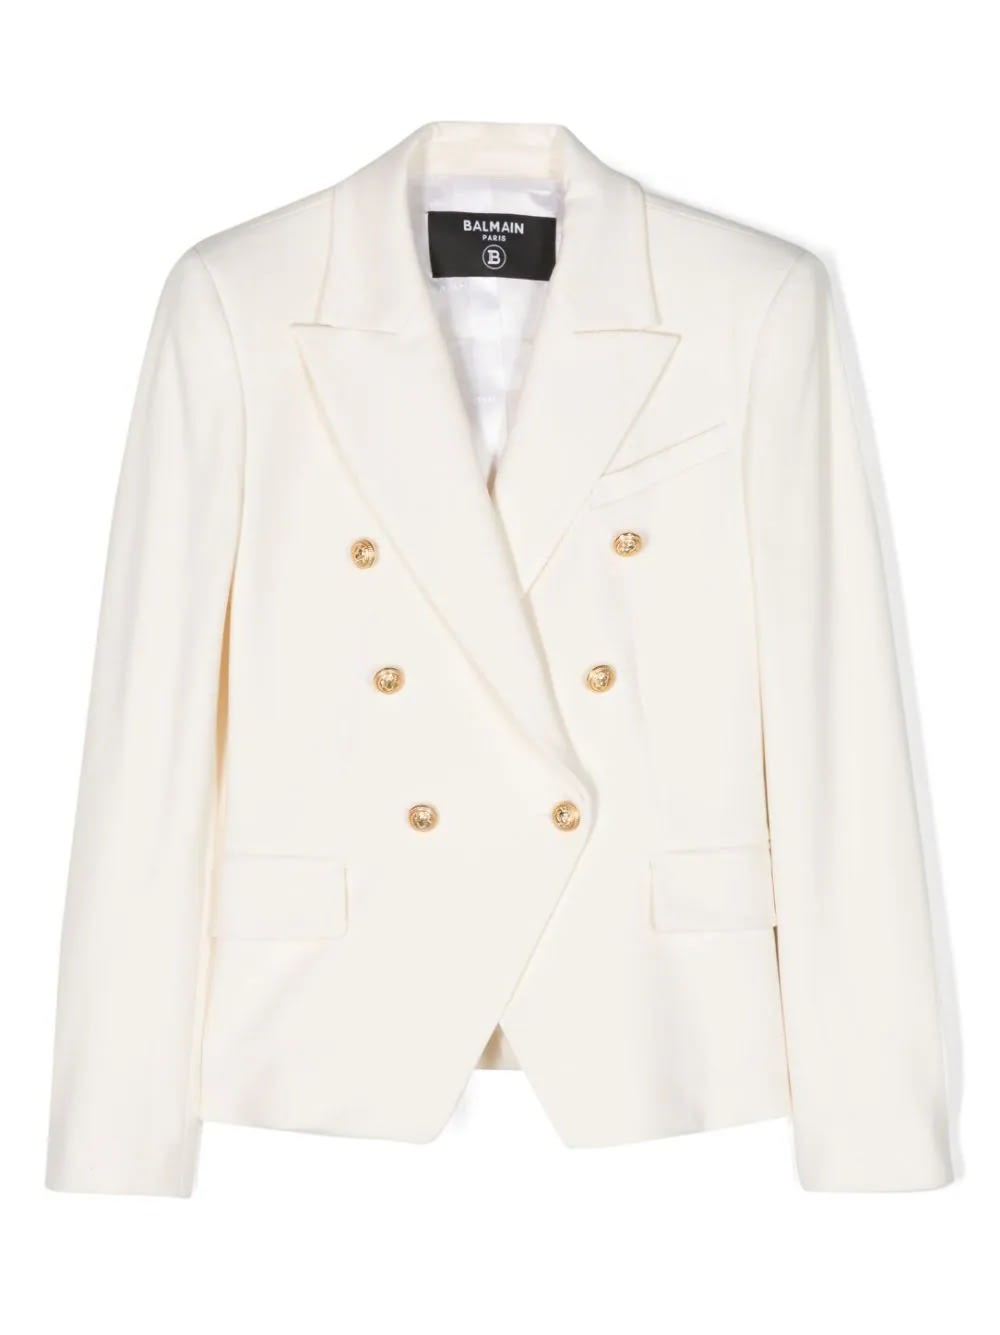 BALMAIN WHITE DOUBLE-BREASTED JACKET WITH EMBOSSED GOLD BUTTONS